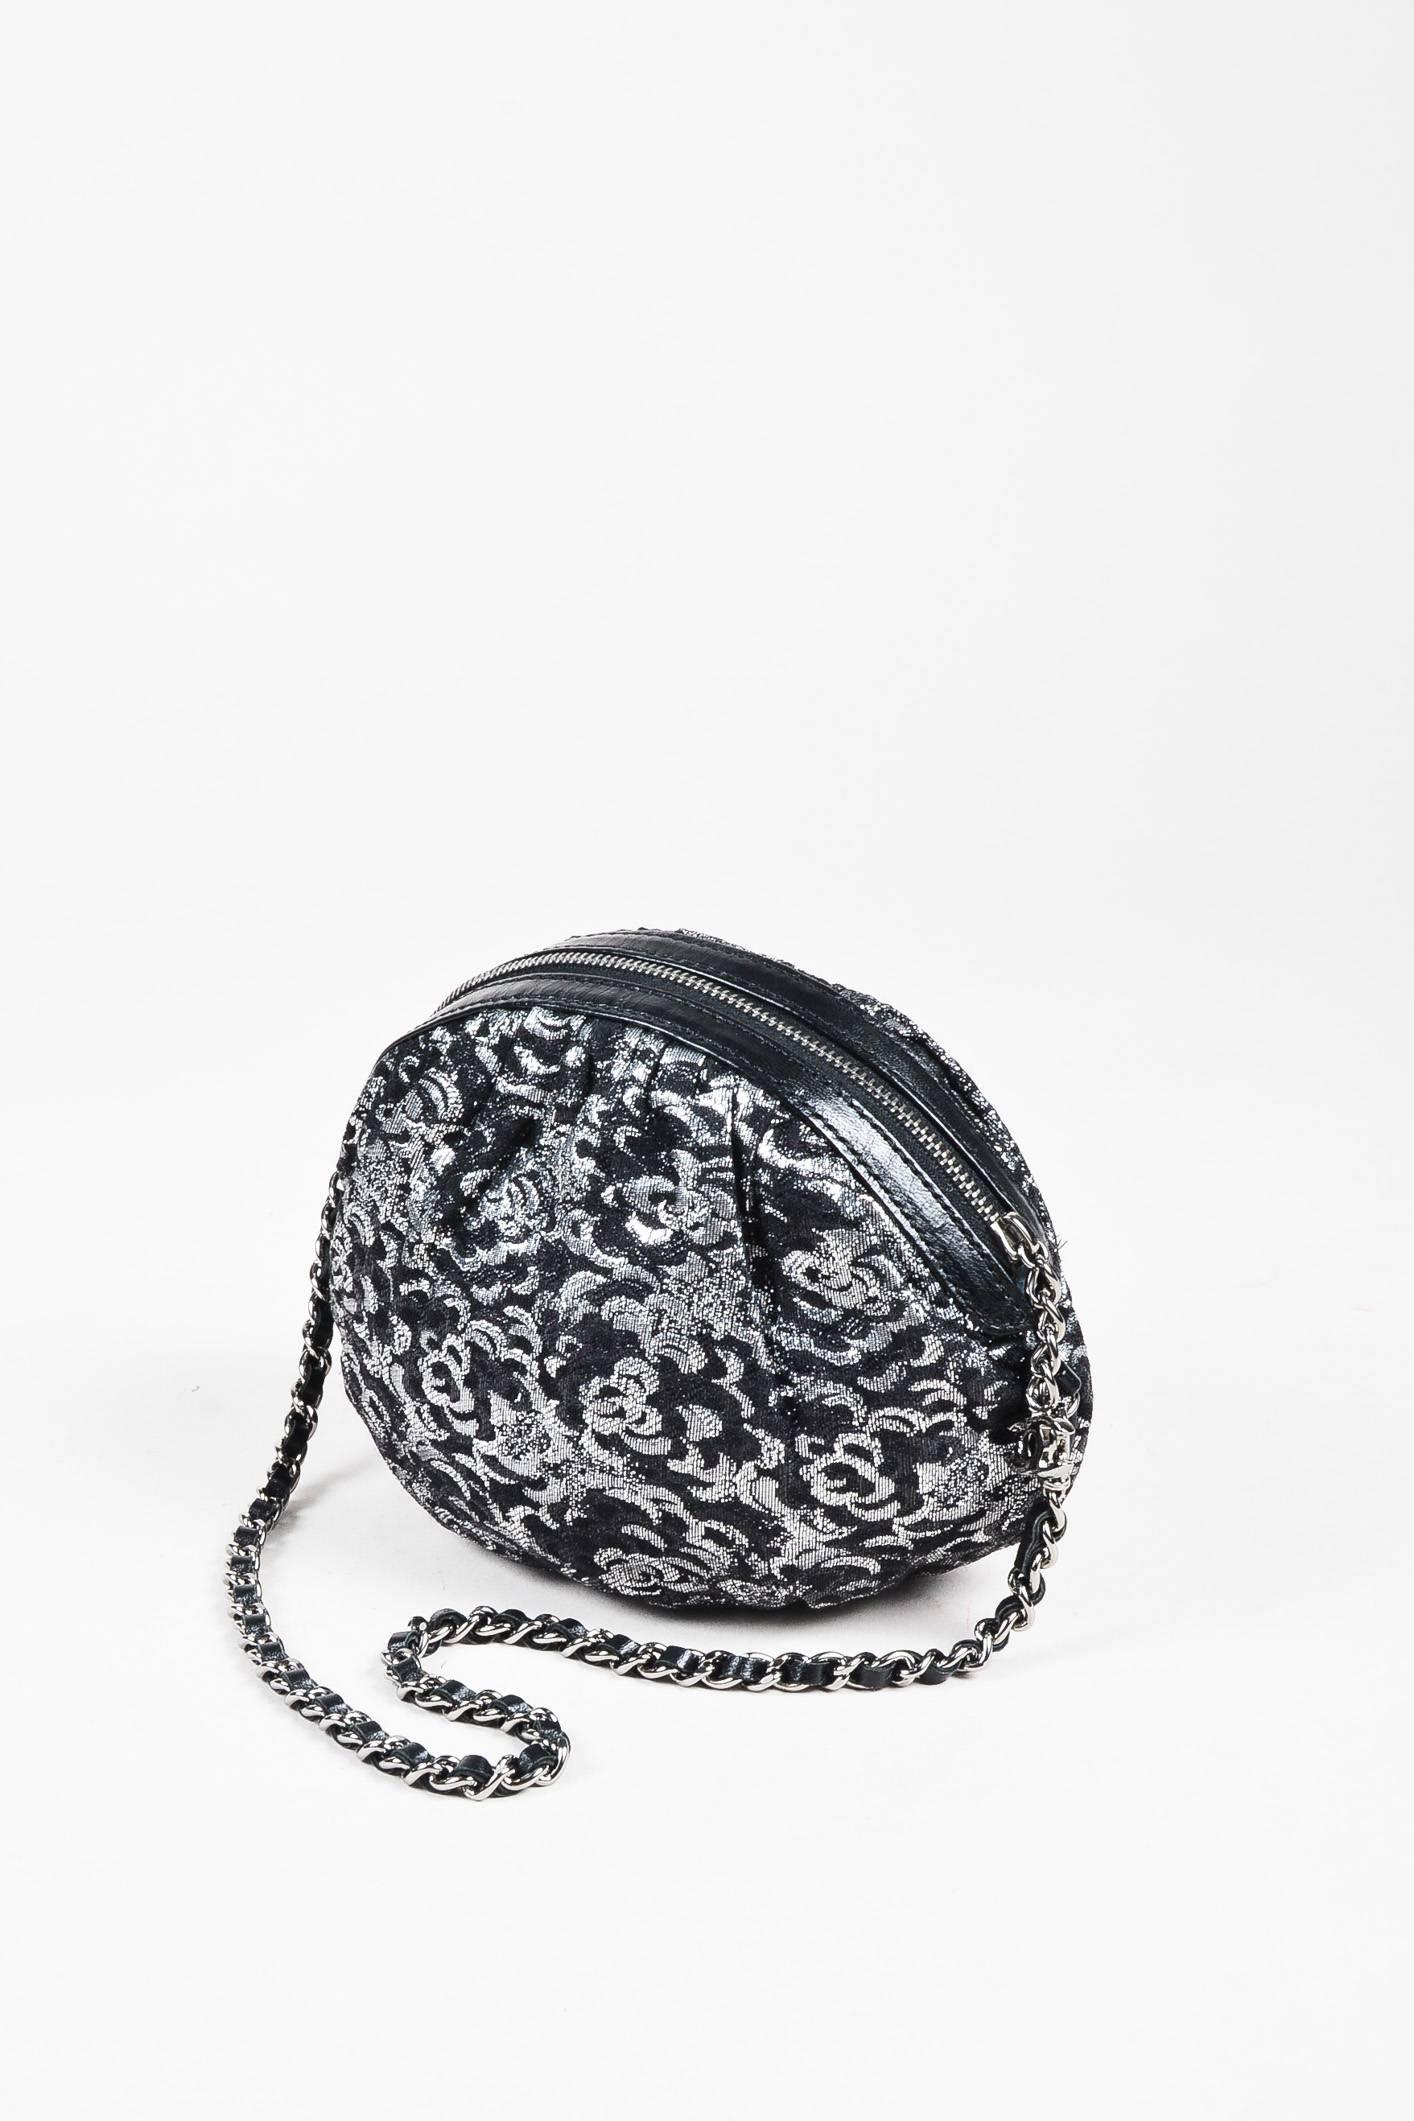 Chanel black jacquard pouch designed with a silver-tone metal chain strap. Leather trim runs along zip top closure. A sweet departure from the brand's signature offering. Serial #:9017274. Circa 2004-2005.

Measurements:
Height: Approximately